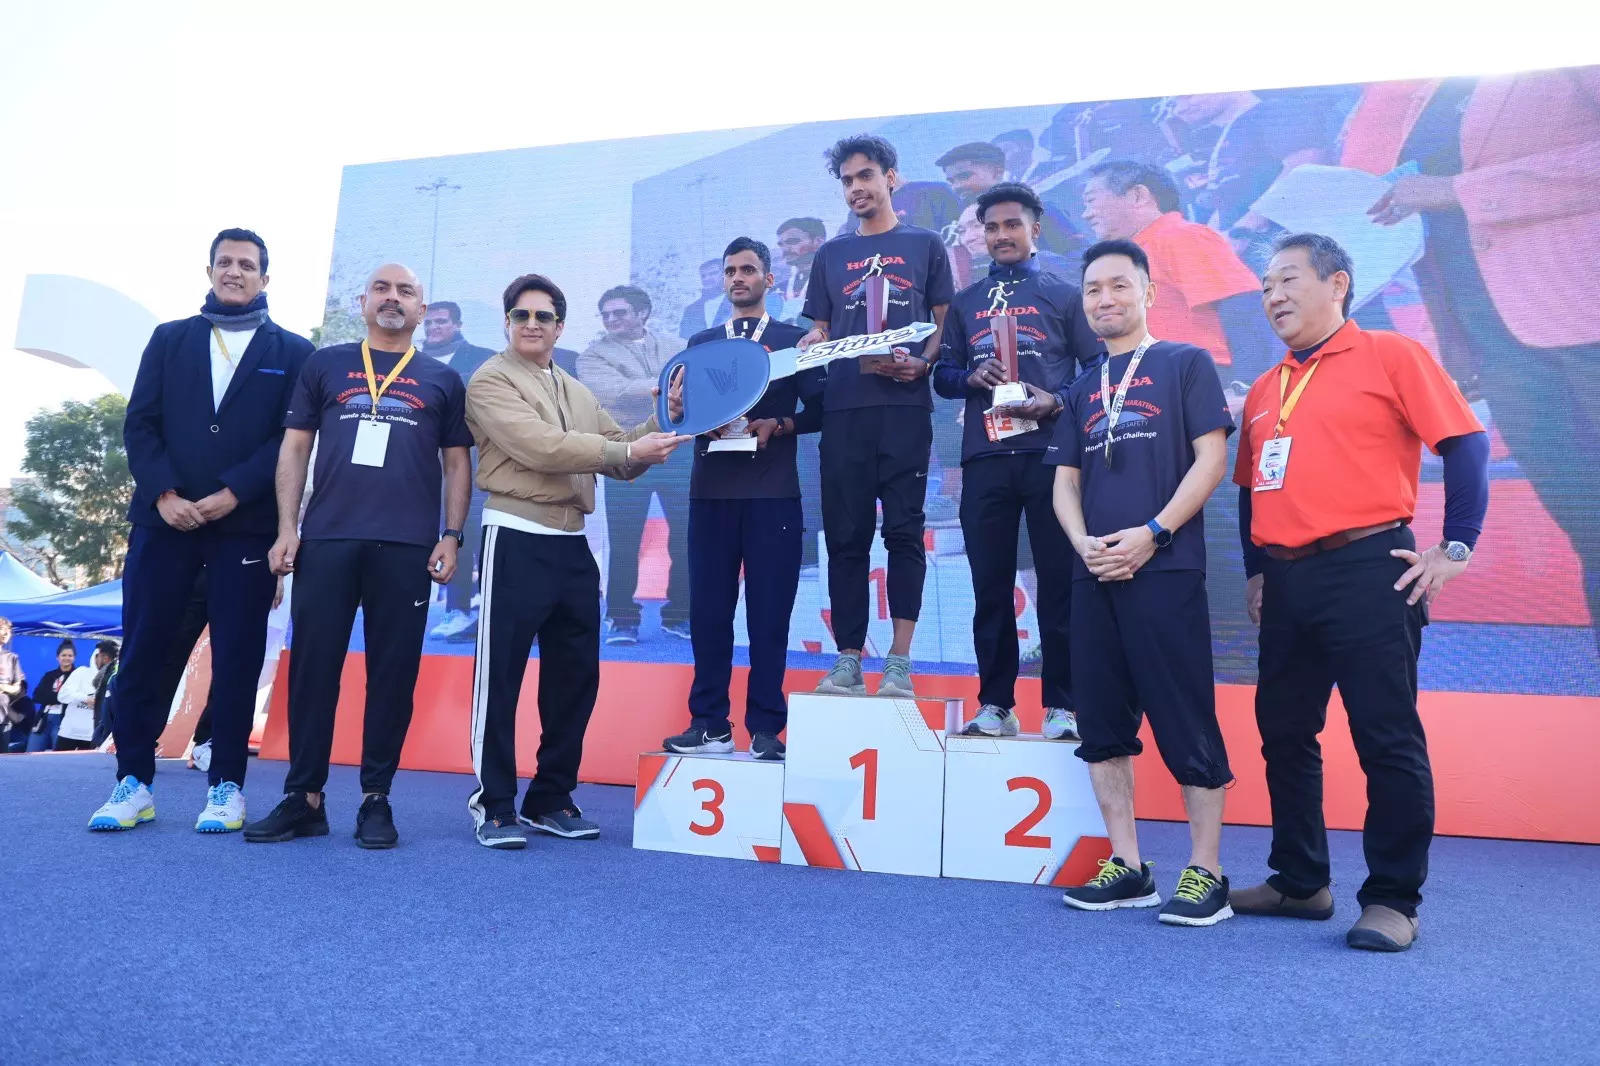 <p>This event was organized to amplify awareness about road safety, aligning with the company's global vision to realize zero traffic collision fatalities. </p>